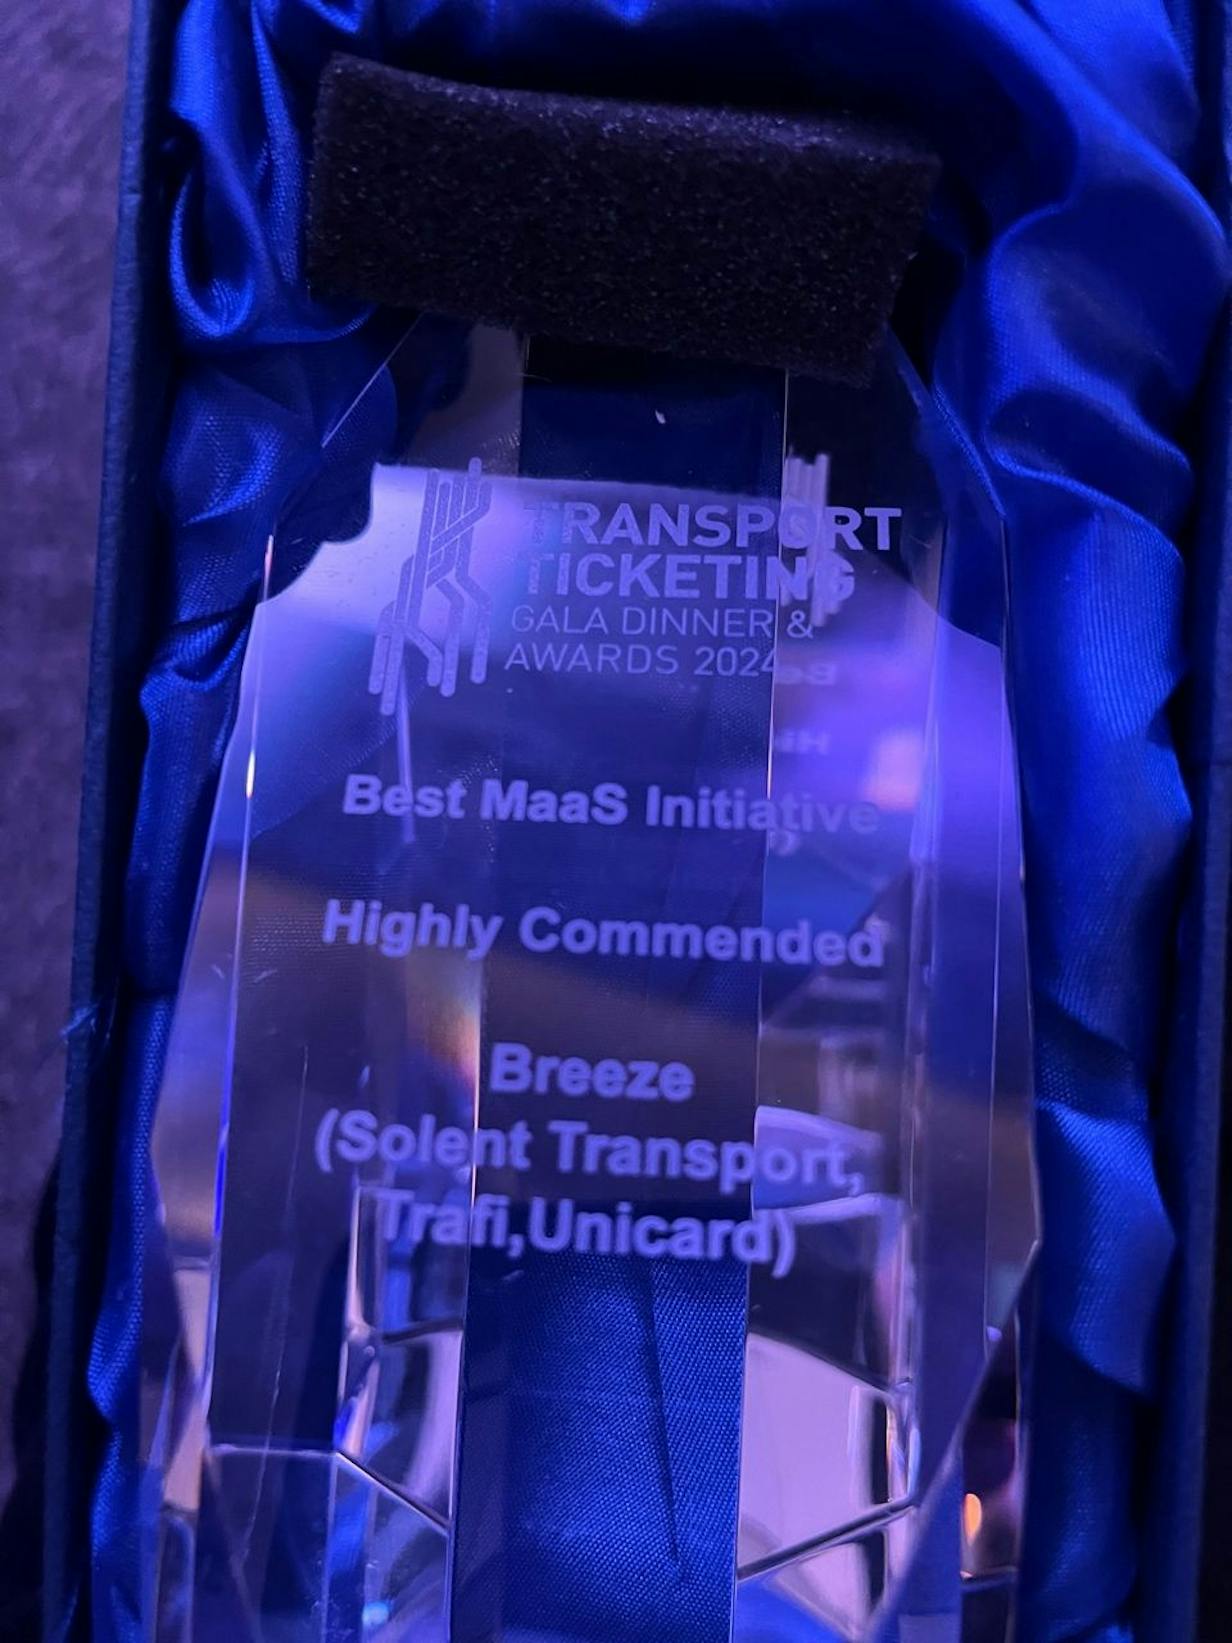 Highly Commended award in the category of Best MaaS Initiative at 2024 Transport Ticketing Awards